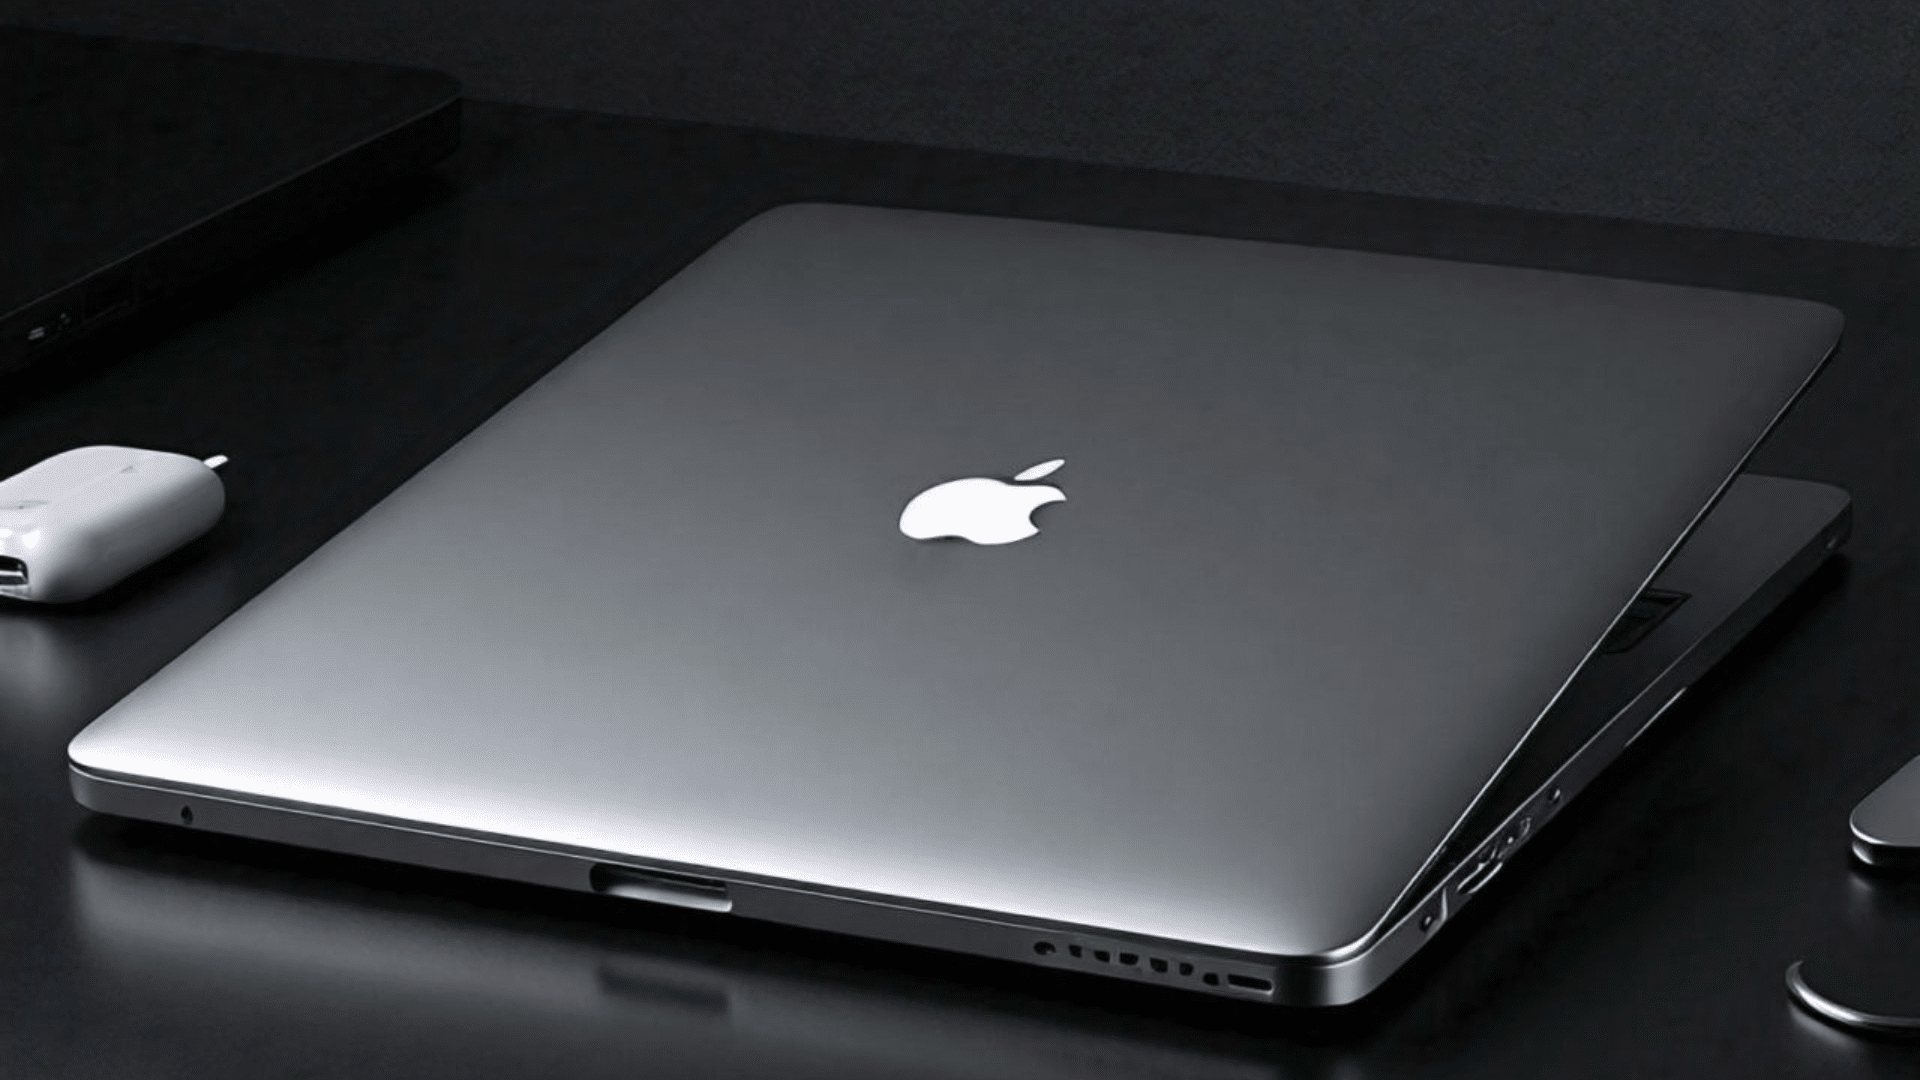 Discover the features and performance of the M3 MacBook Pro. Is it the right choice for you? Find out here.